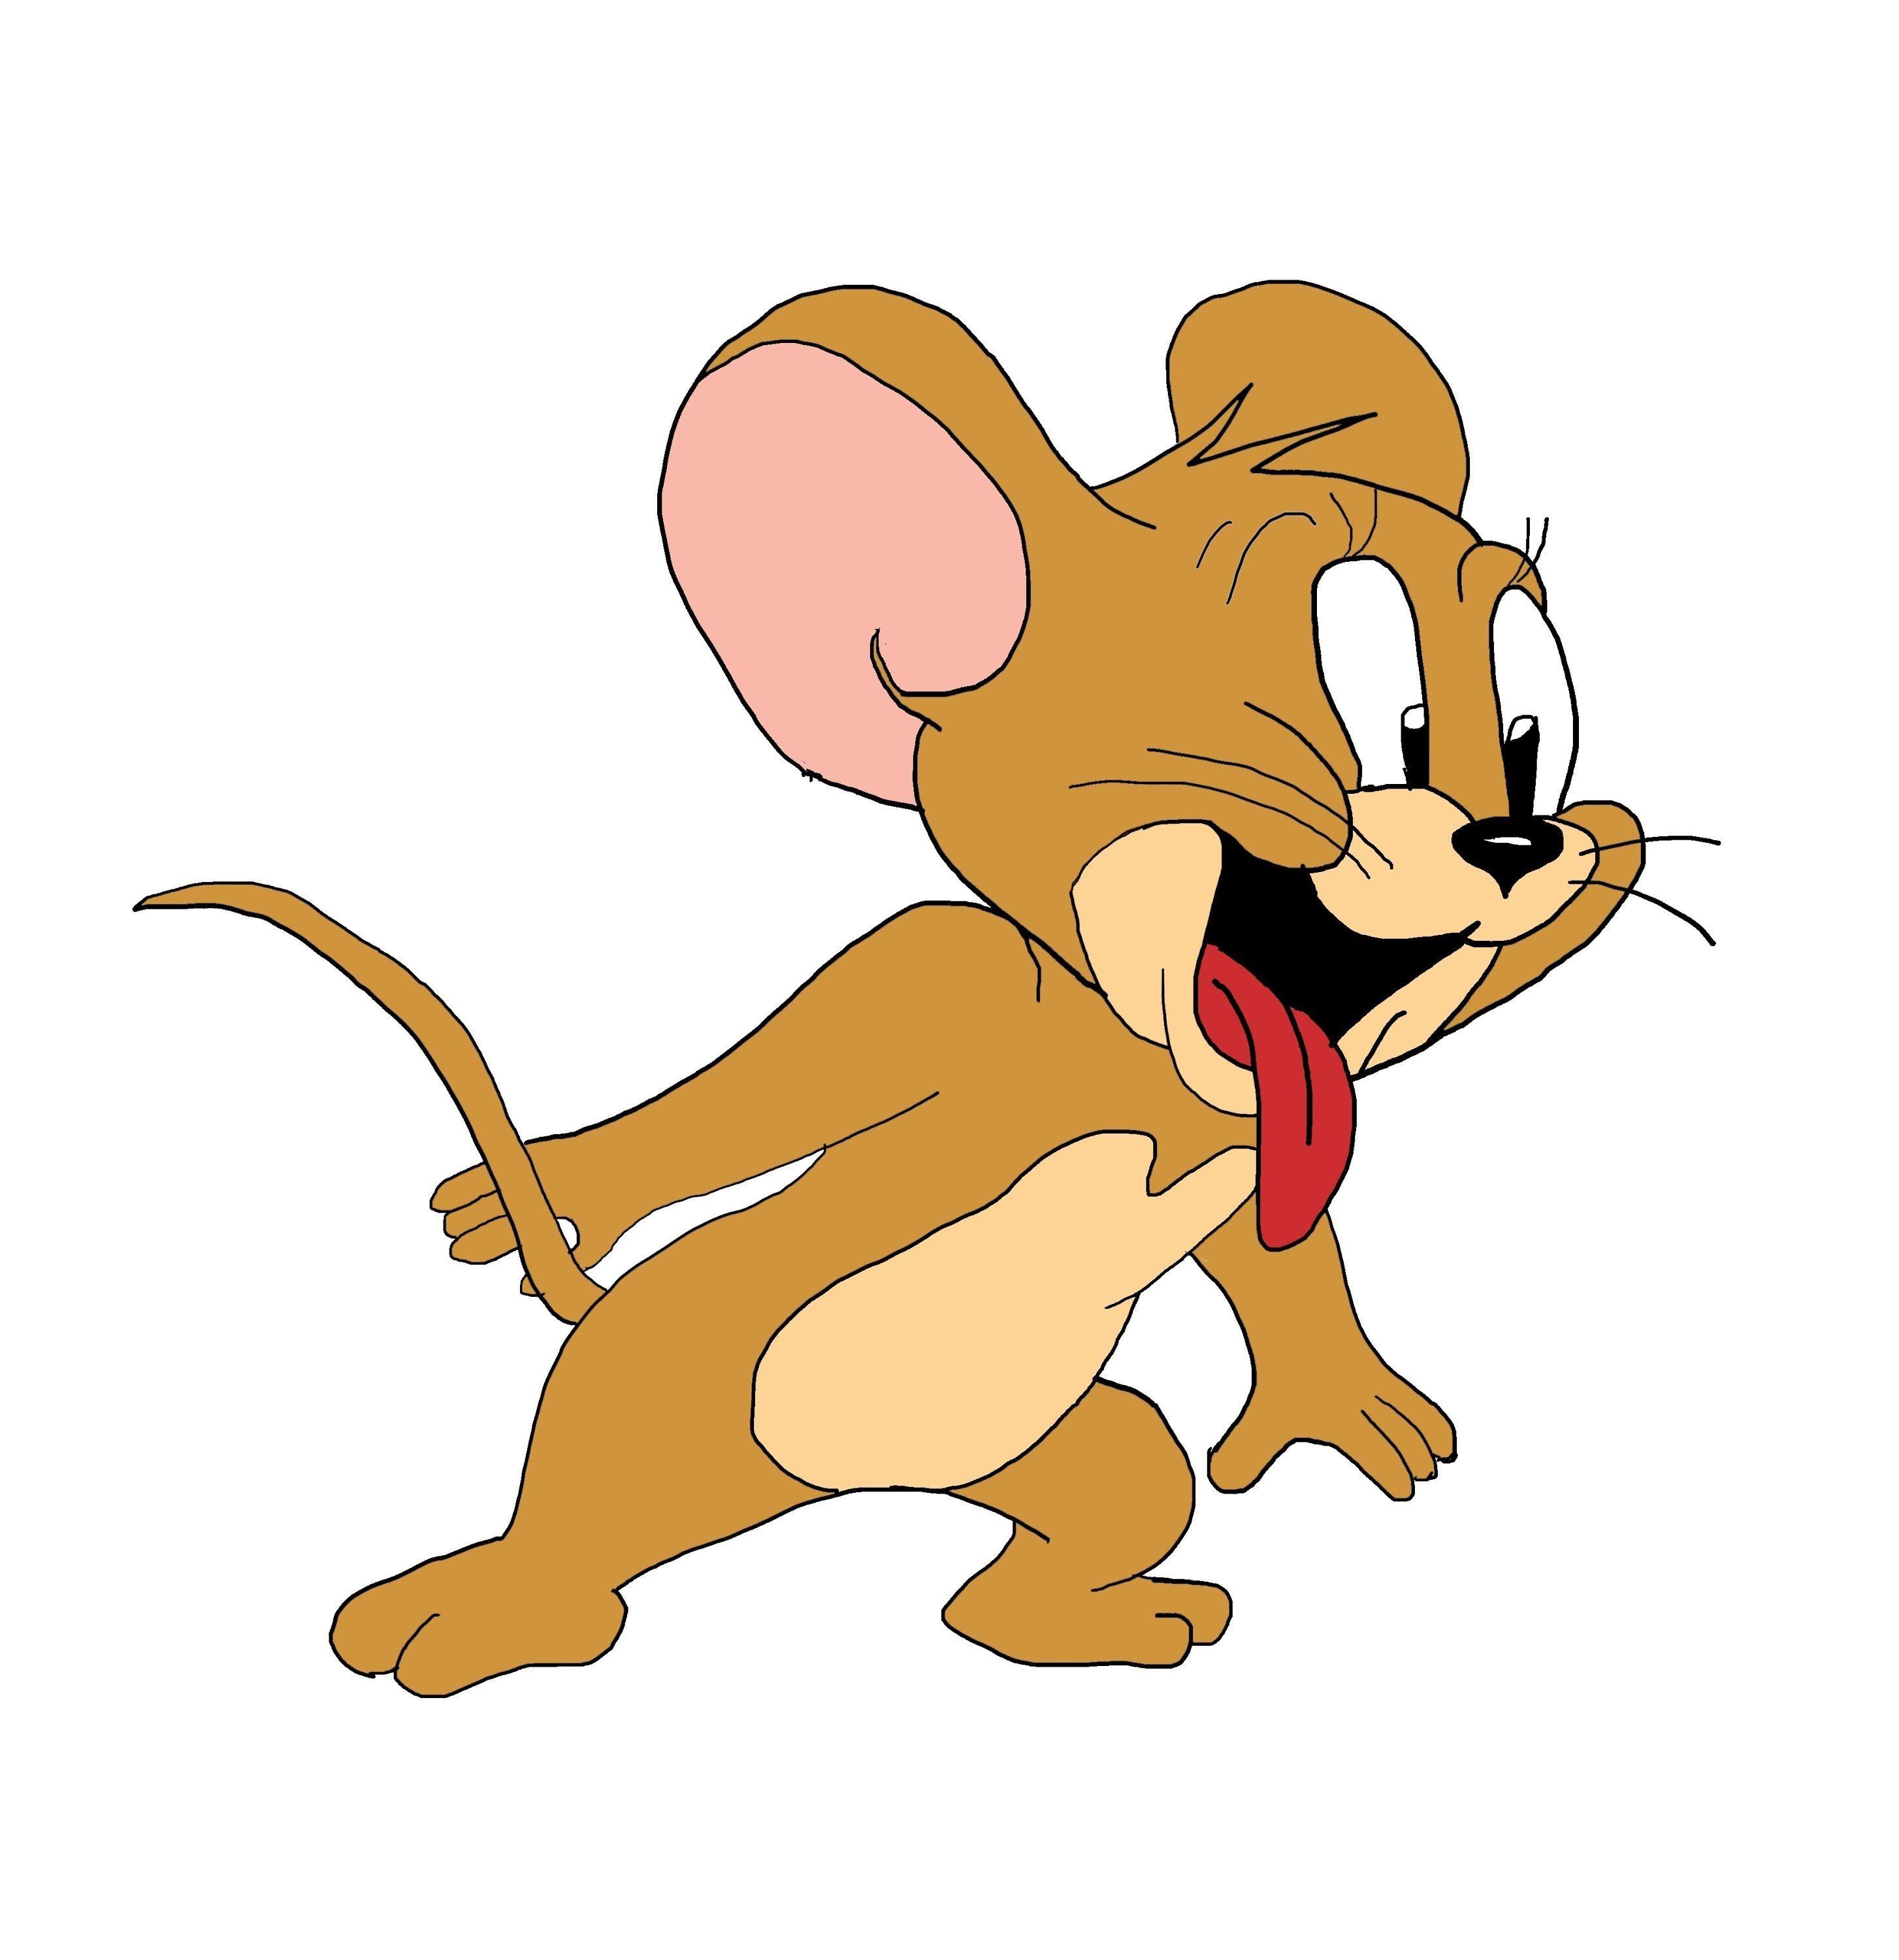 Image Of Tom And Jerry